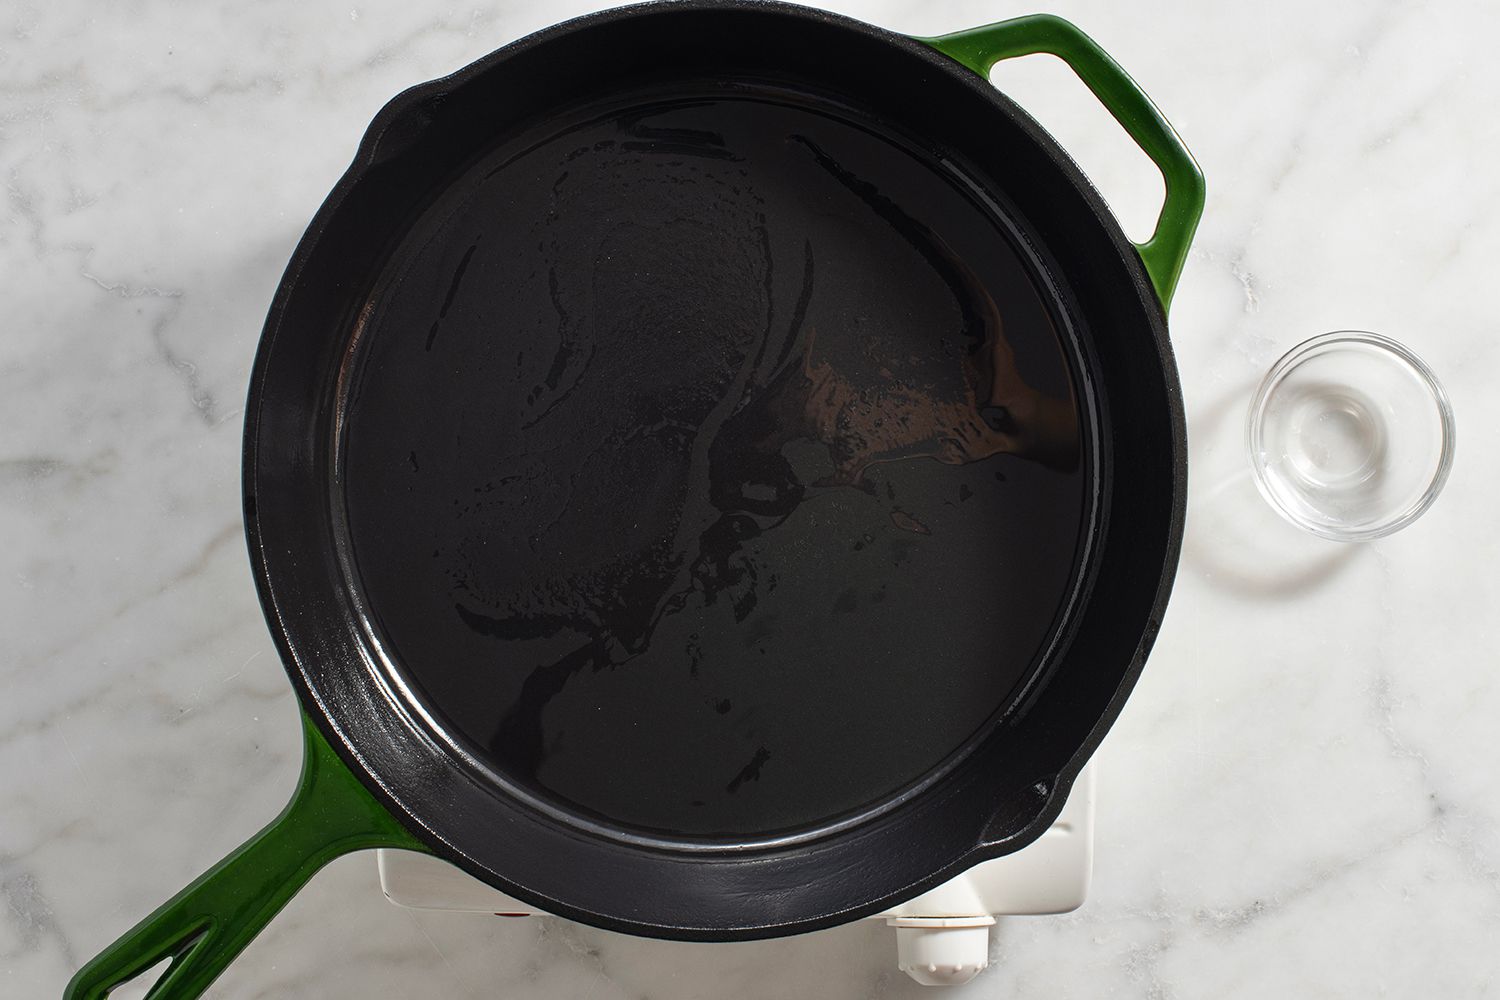 cast iron skillet on a cooktop